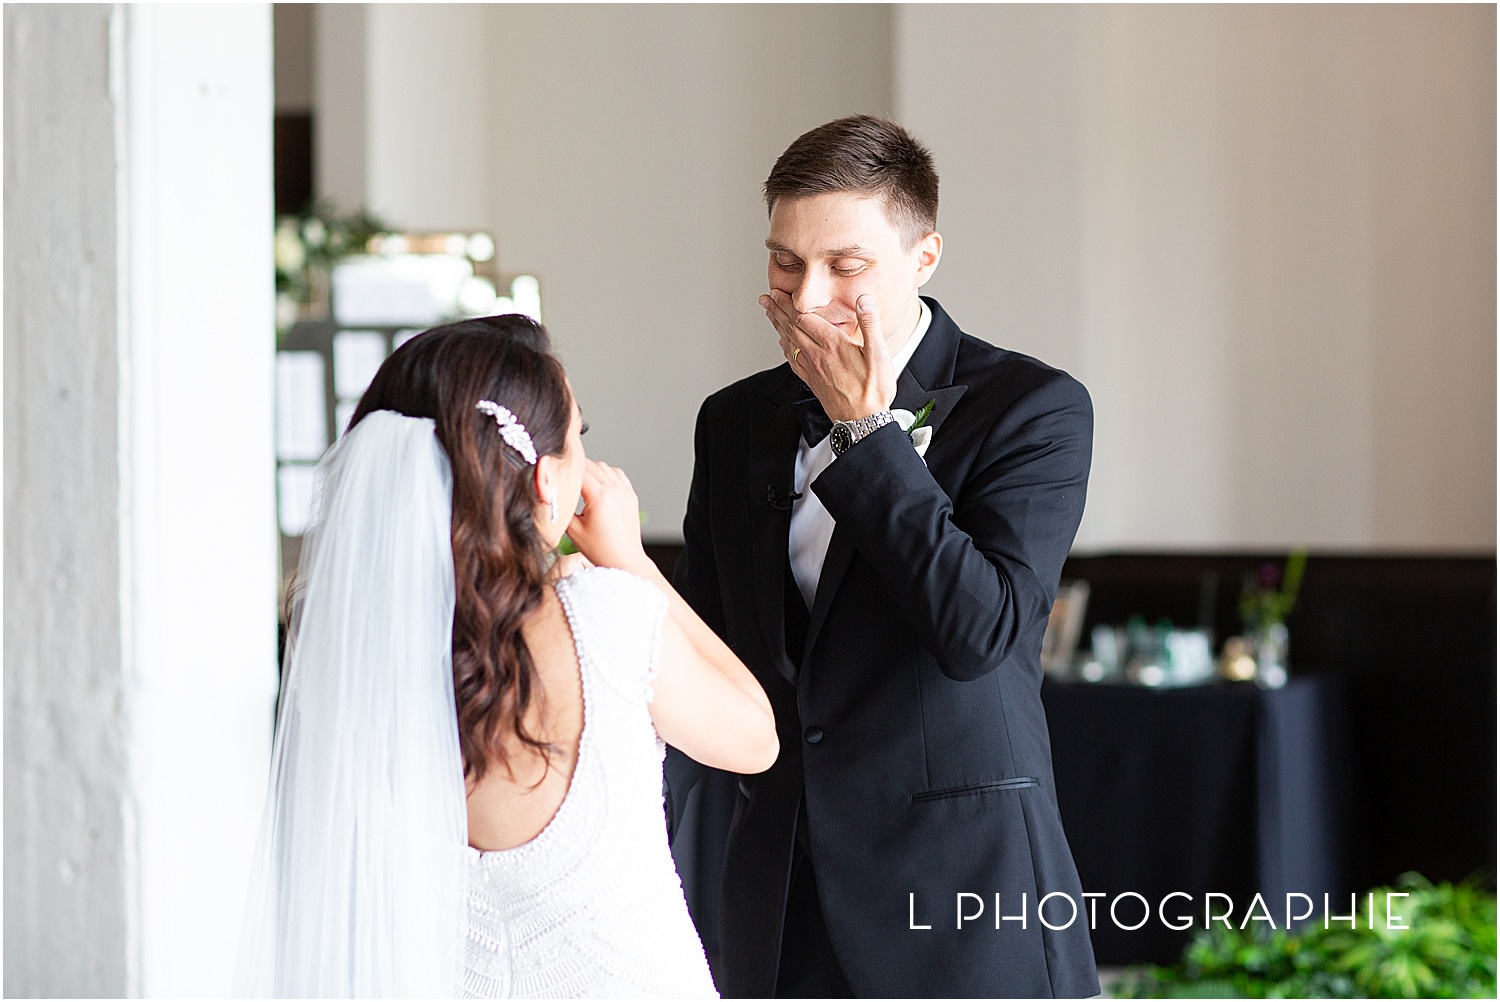 L Photographie St. Louis wedding photography The Last Hotel_0013.jpg